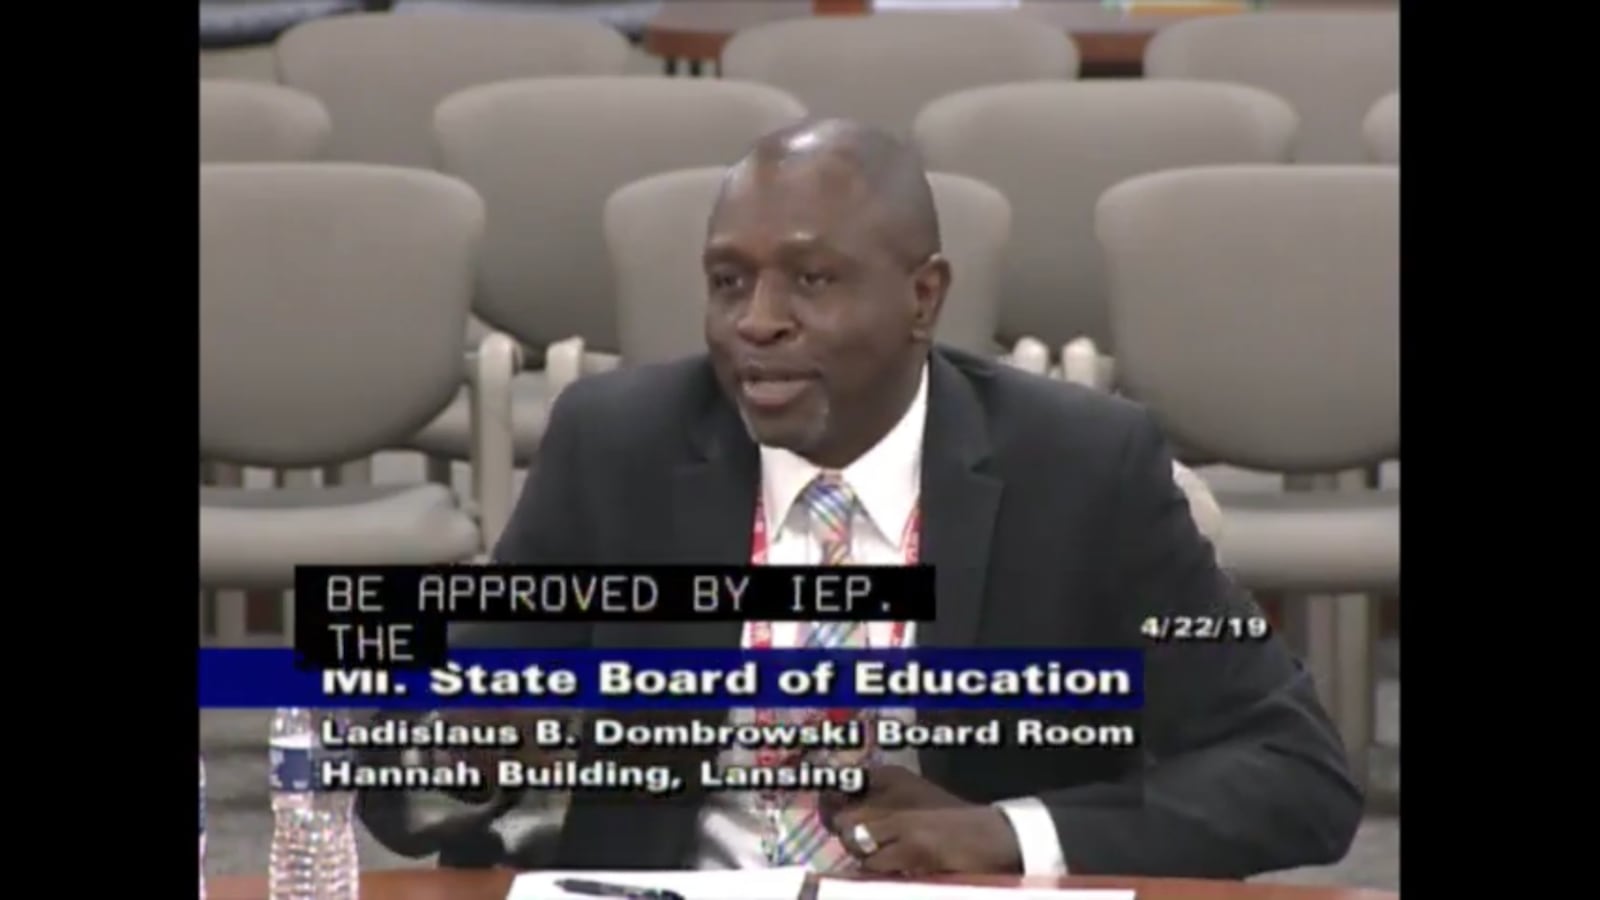 Eric Thomas is one of five candidates for State Superintendent of Michigan schools. In this screenshot from his Monday interview, he is discussing his past work as an education administrator in Georgia and Cincinnati.